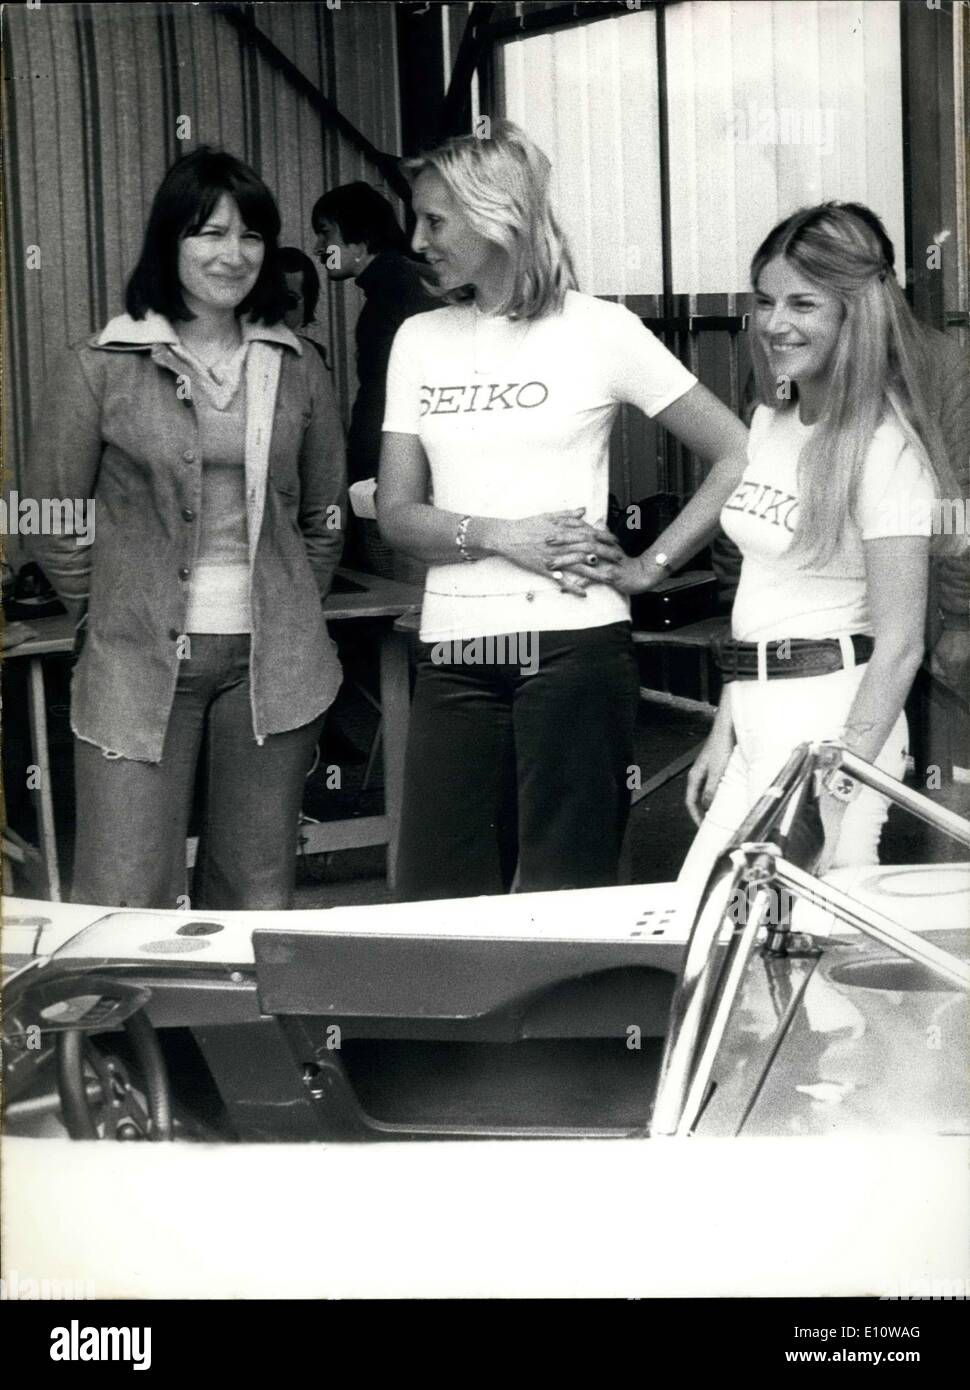 Jun. 12, 1974 - There is a charm offensive this year on the Sarthe racetrack where three women, for the first time in 40 years, Stock Photo